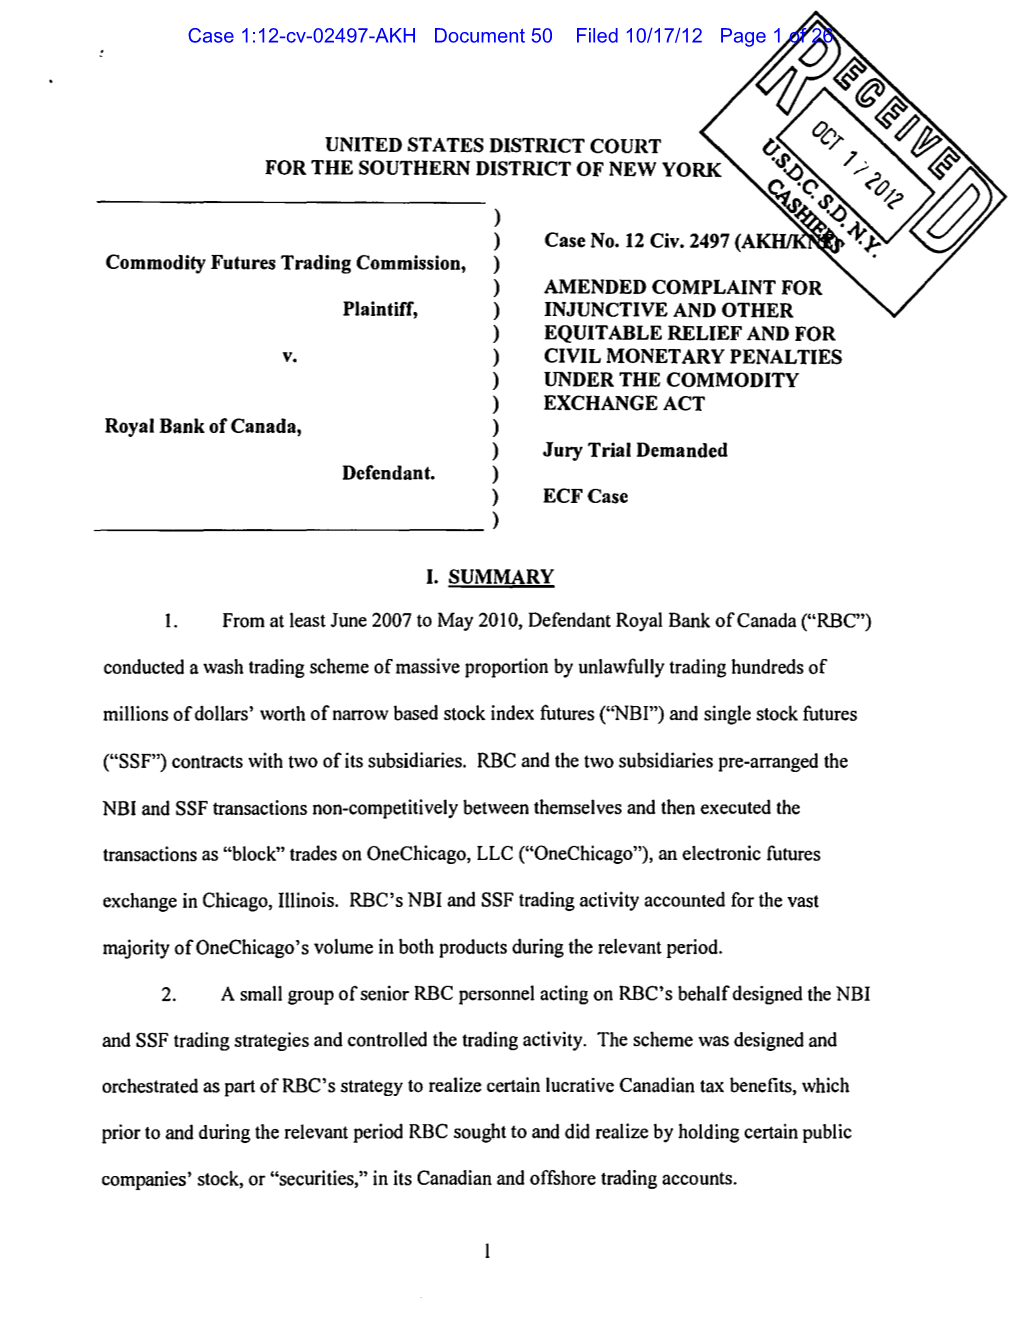 Amended Complaint: Royal Bank of Canada